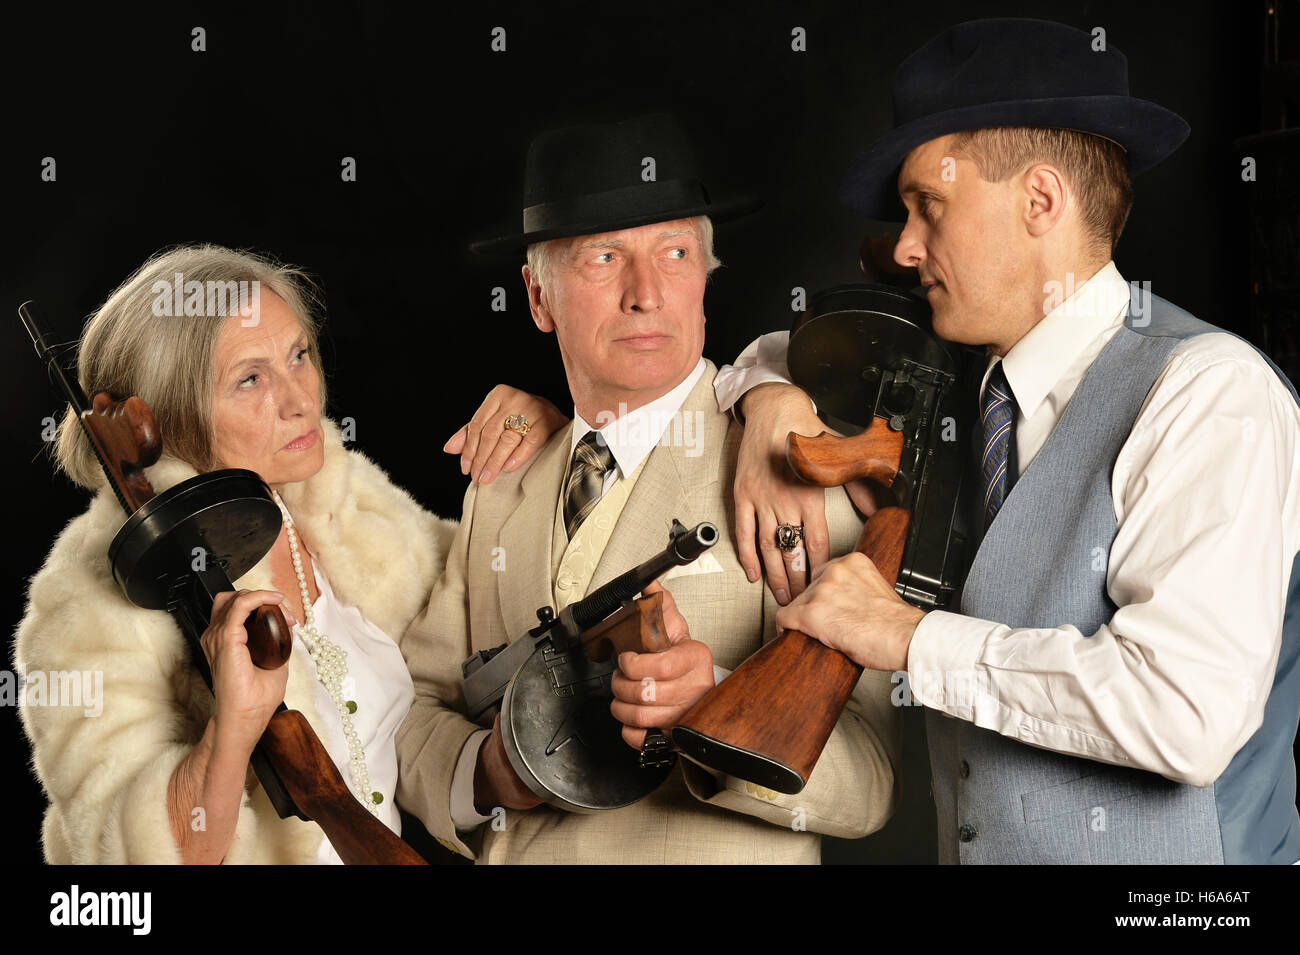 Gangsters companions with weapon Stock Photo